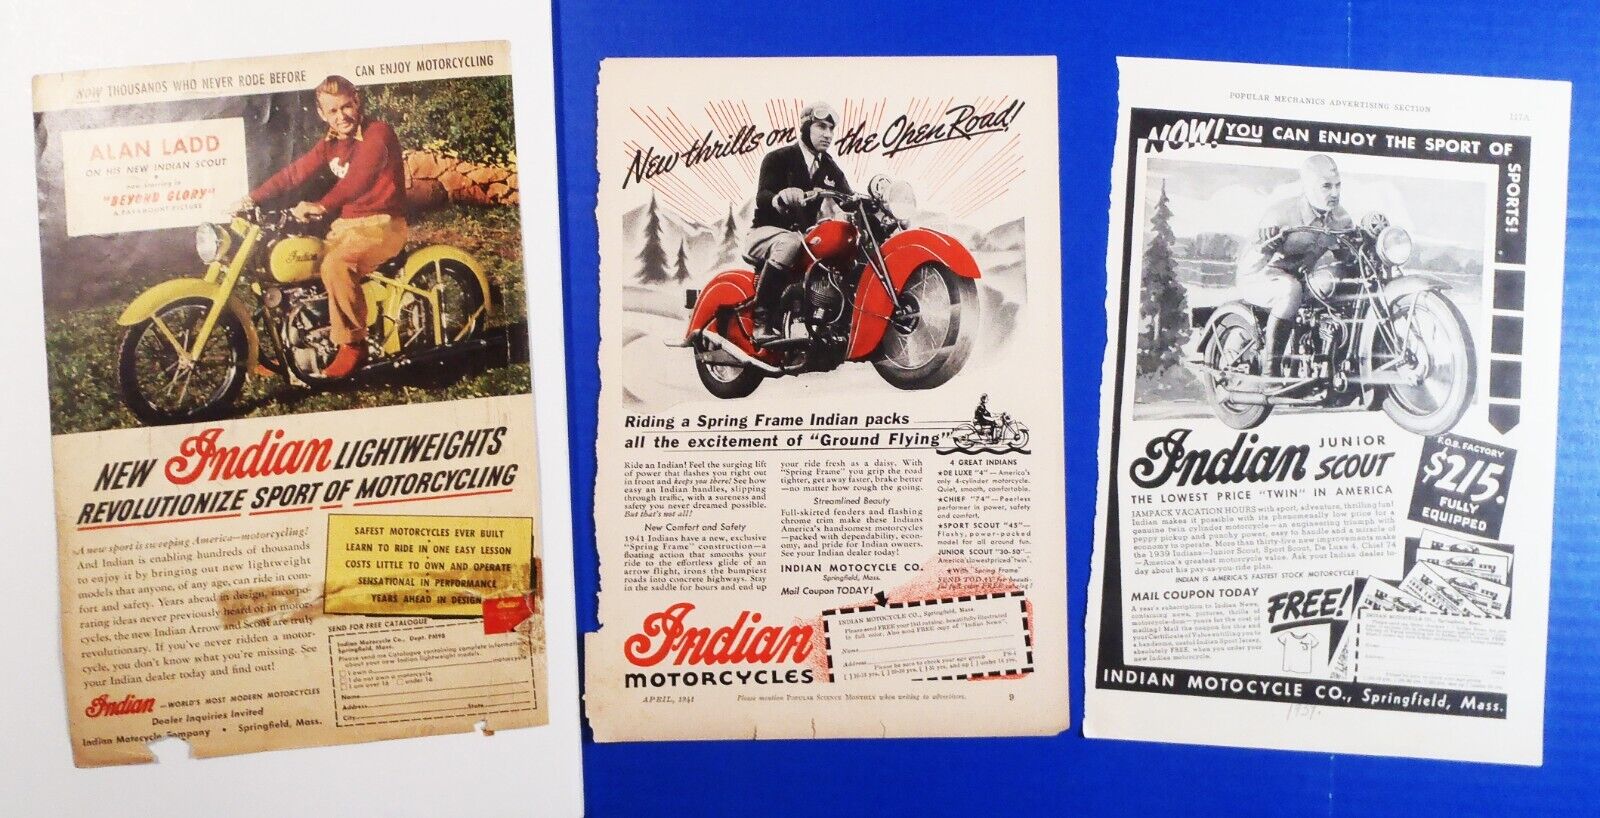 1941 1948 1957 Indian Motocycle Advertising featuring Alan Ladd